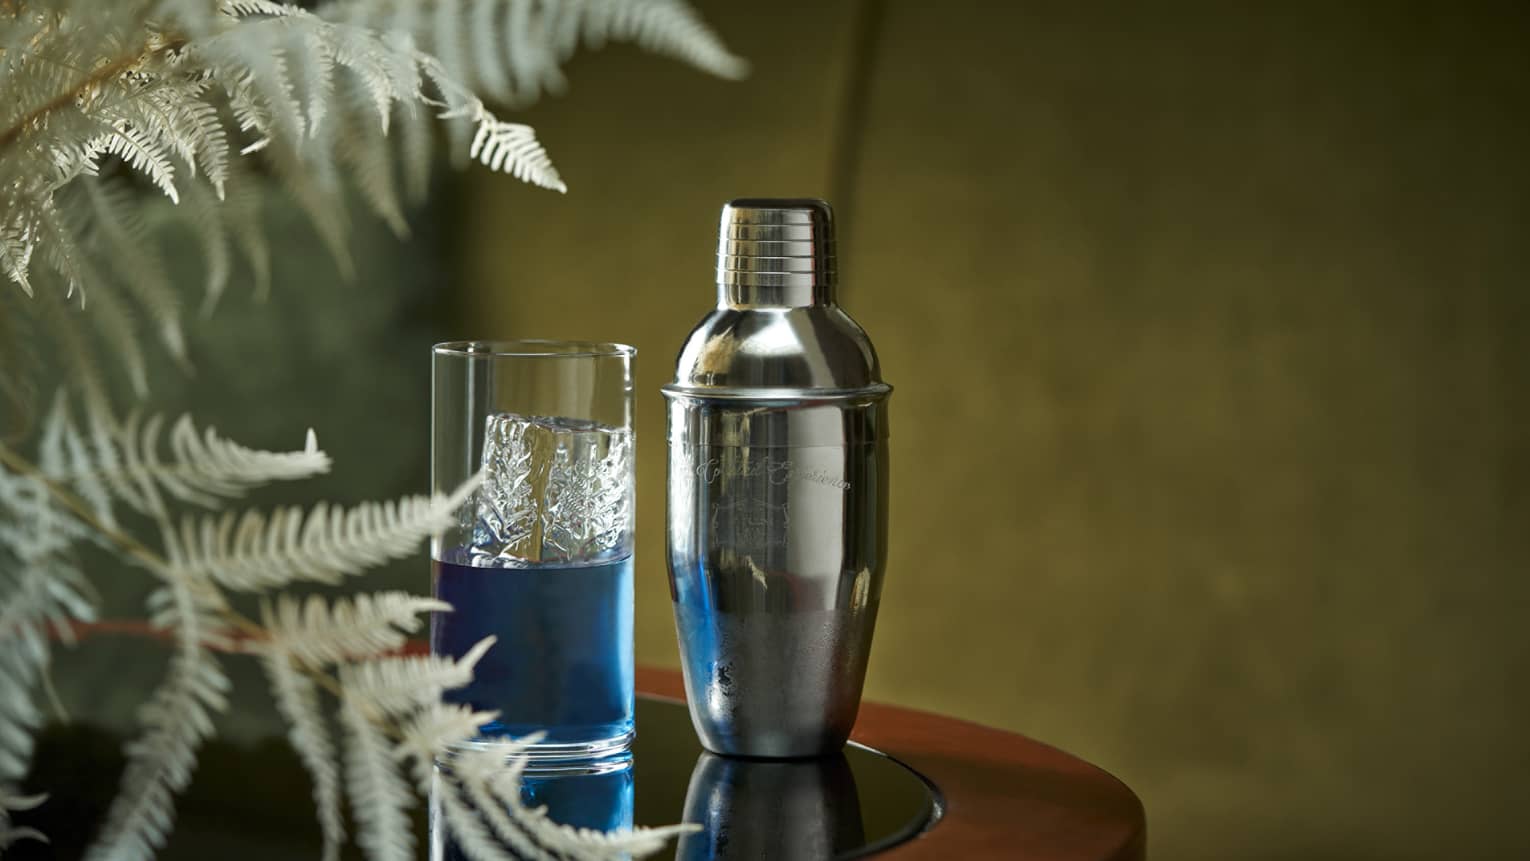 Blue cocktail in crystal highball glass beside chrome cocktail shaker and fern